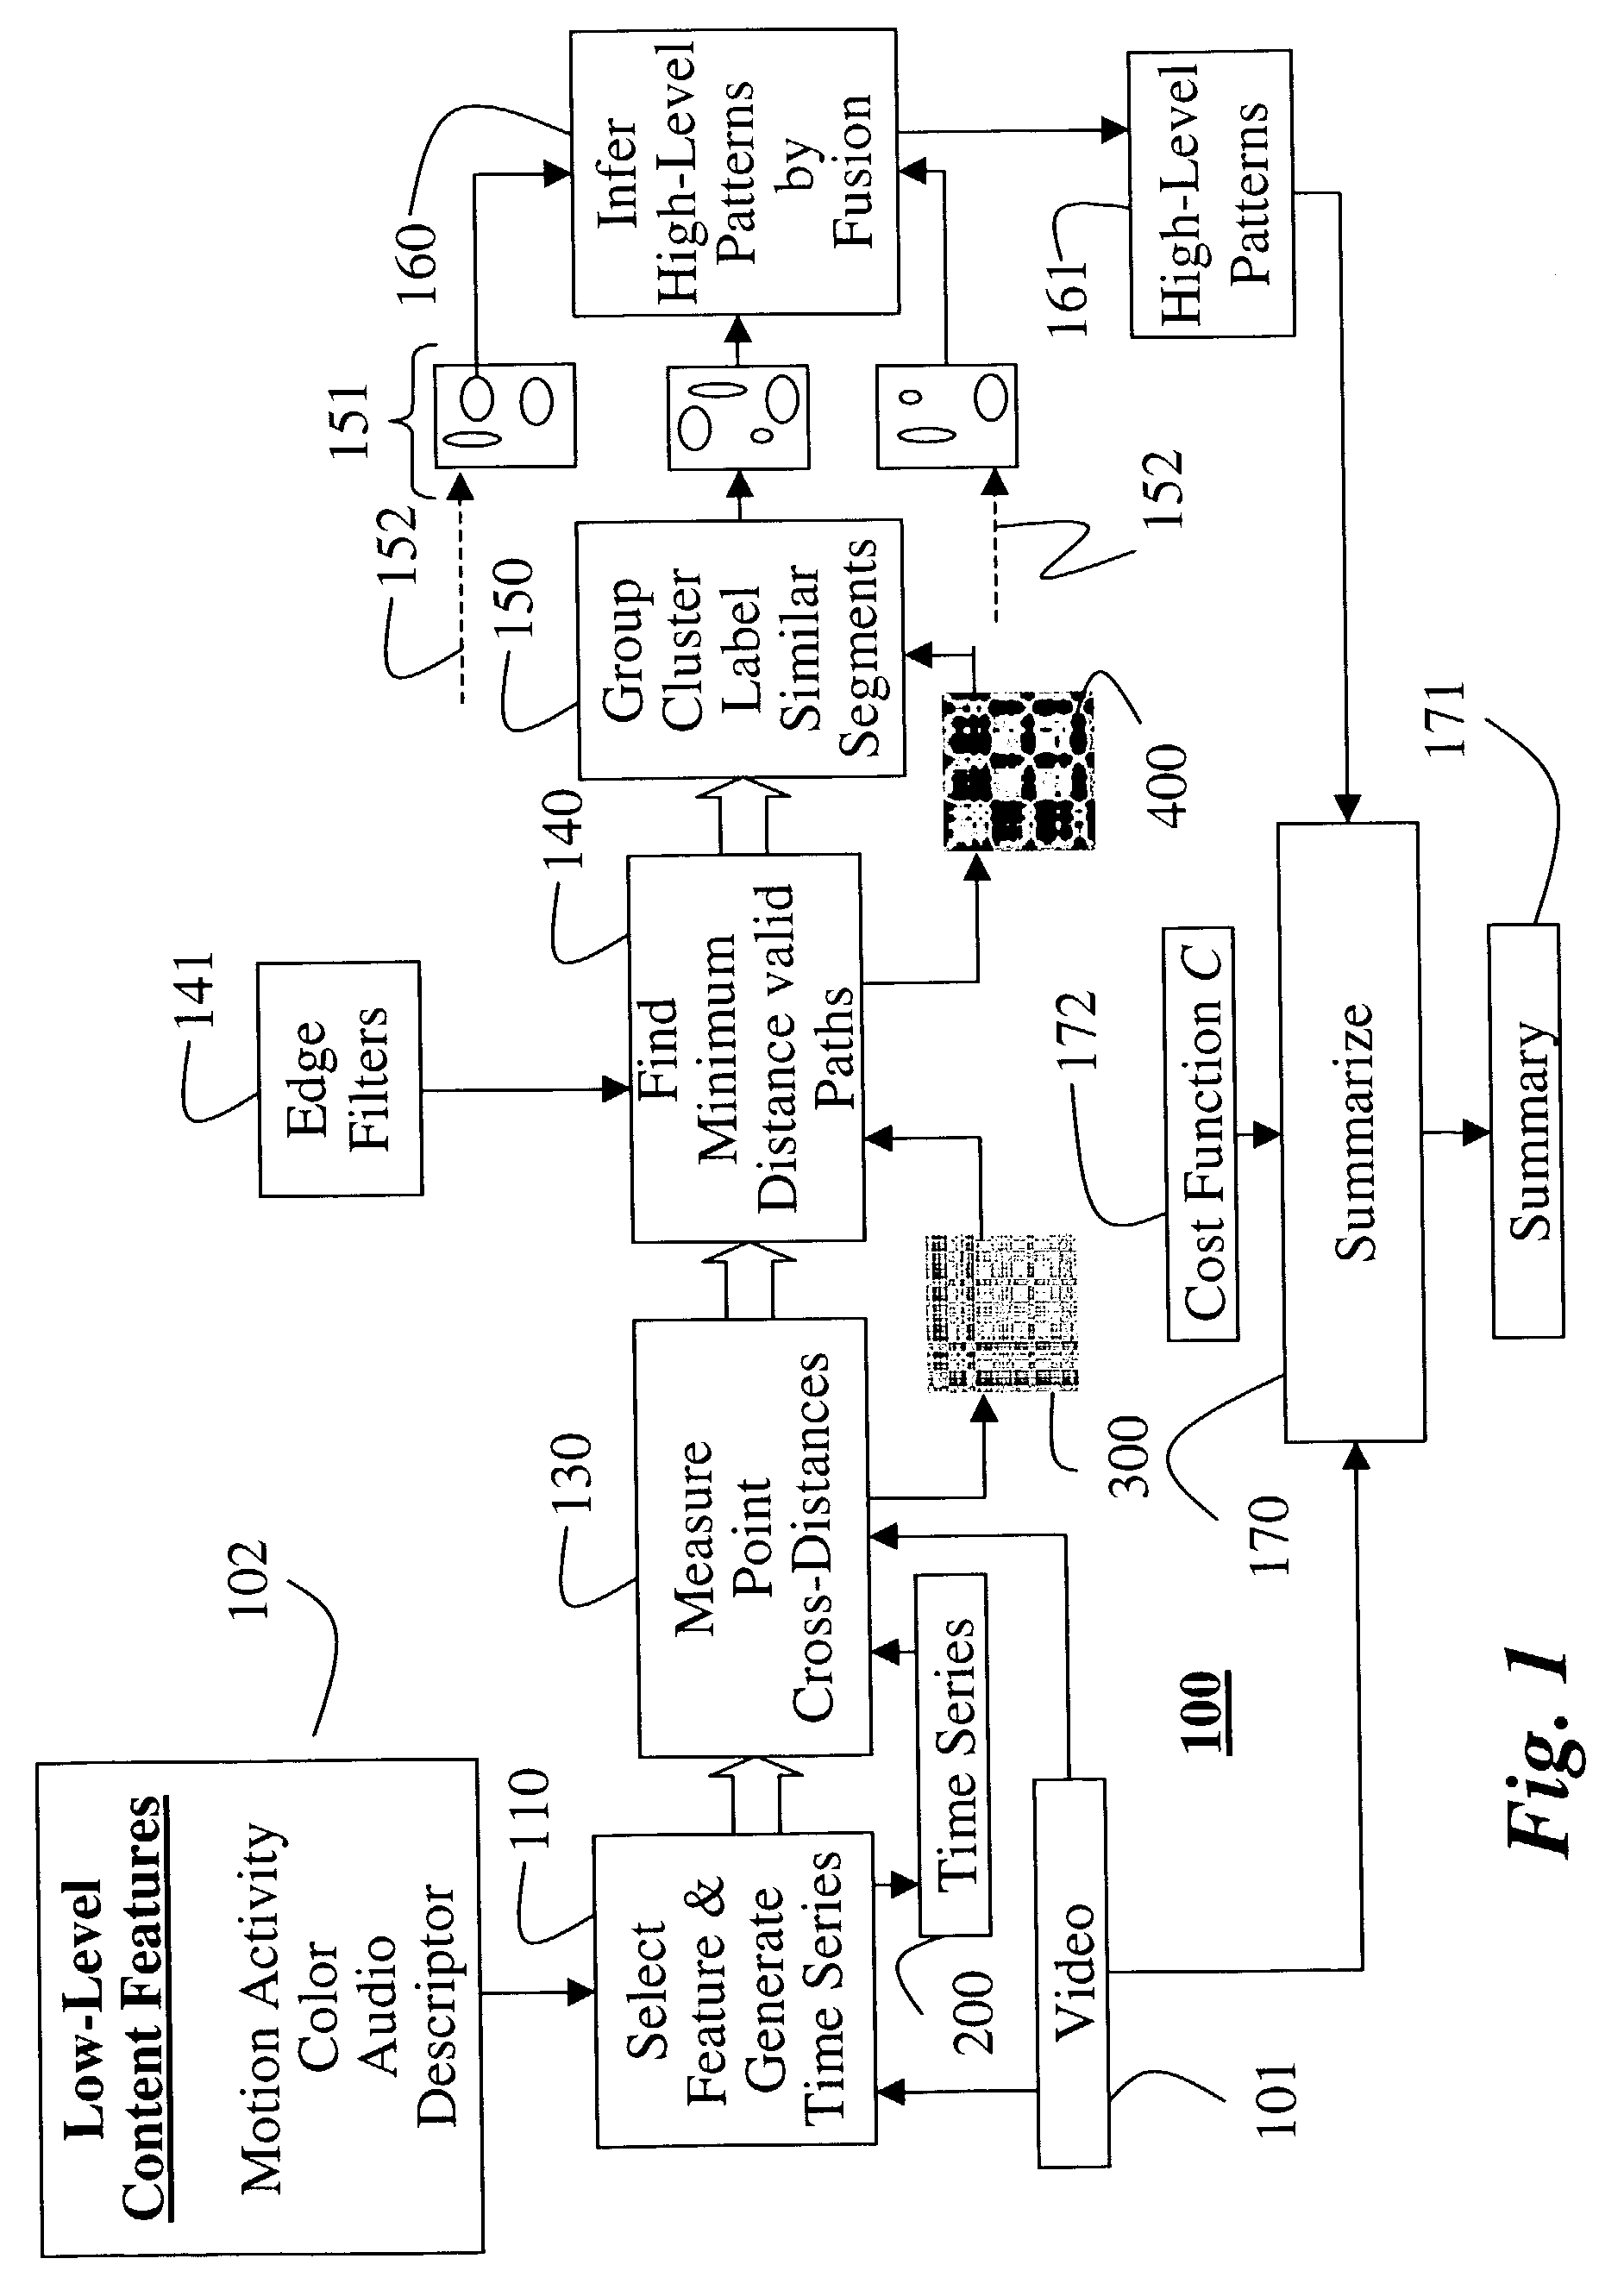 Pattern discovery in multi-dimensional time series using multi-resolution matching